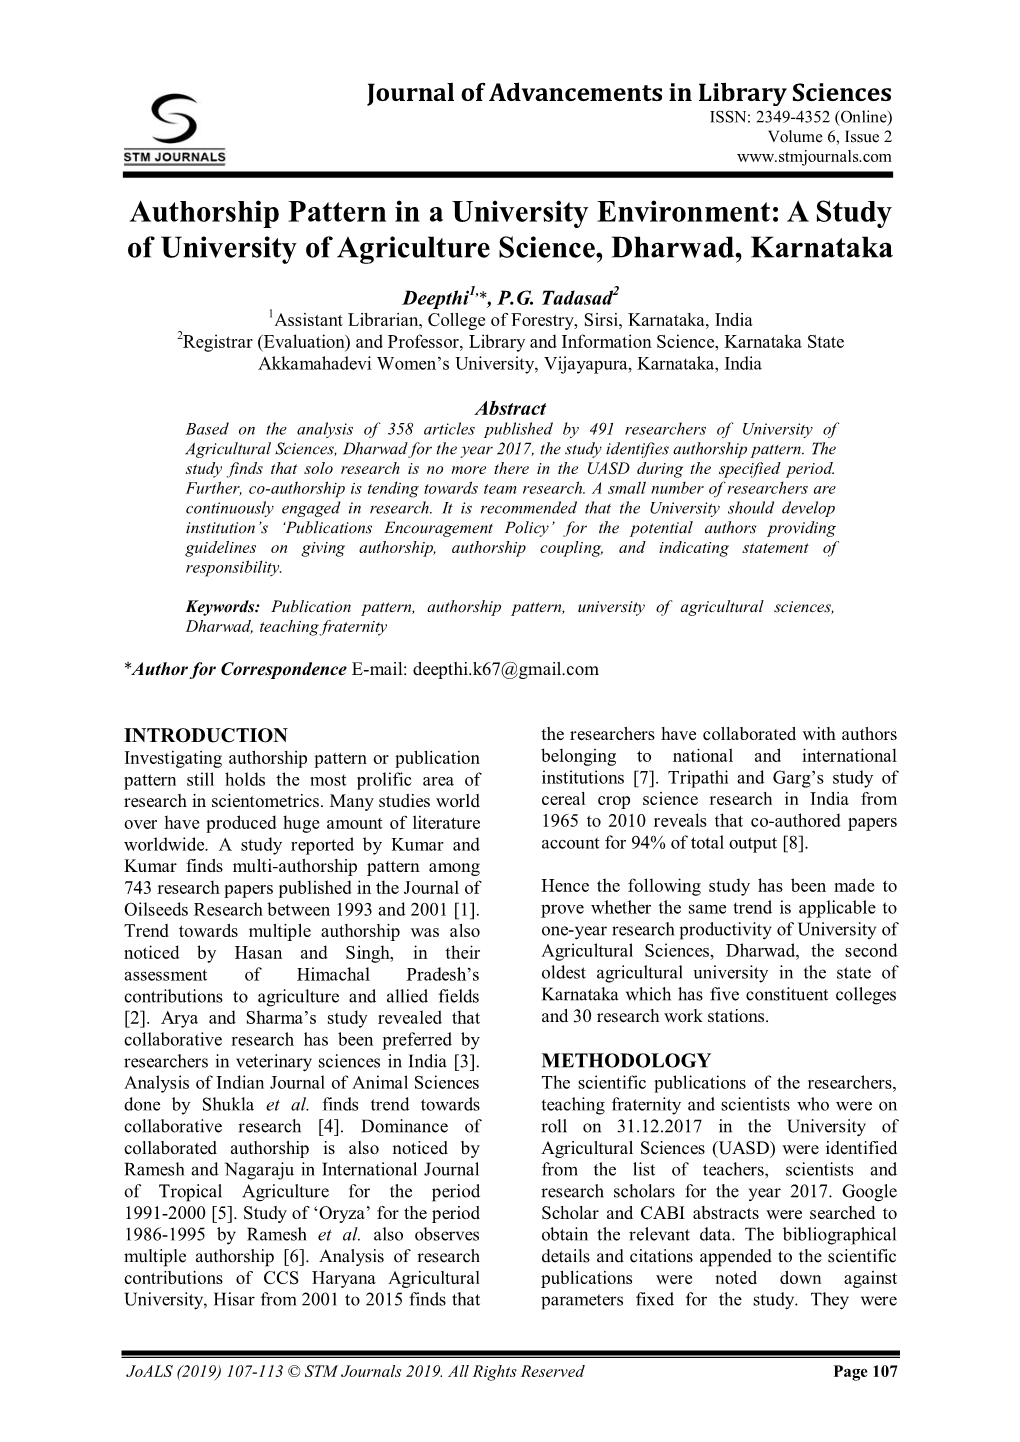 A Study of University of Agriculture Science, Dharwad, Karnataka